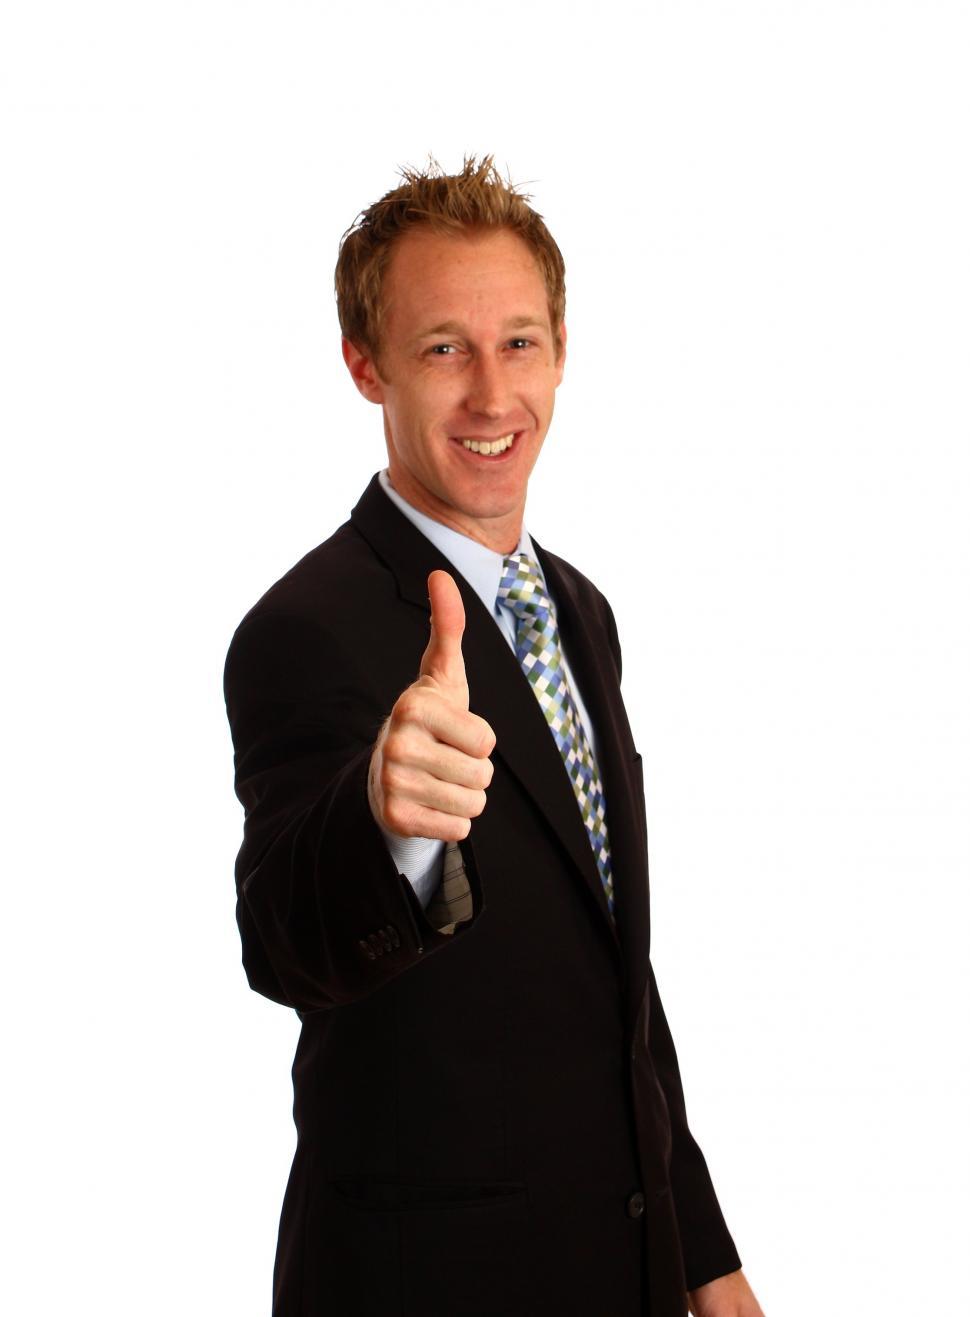 Free Image of A Young Businessman Giving A Thumbs Up Signal 